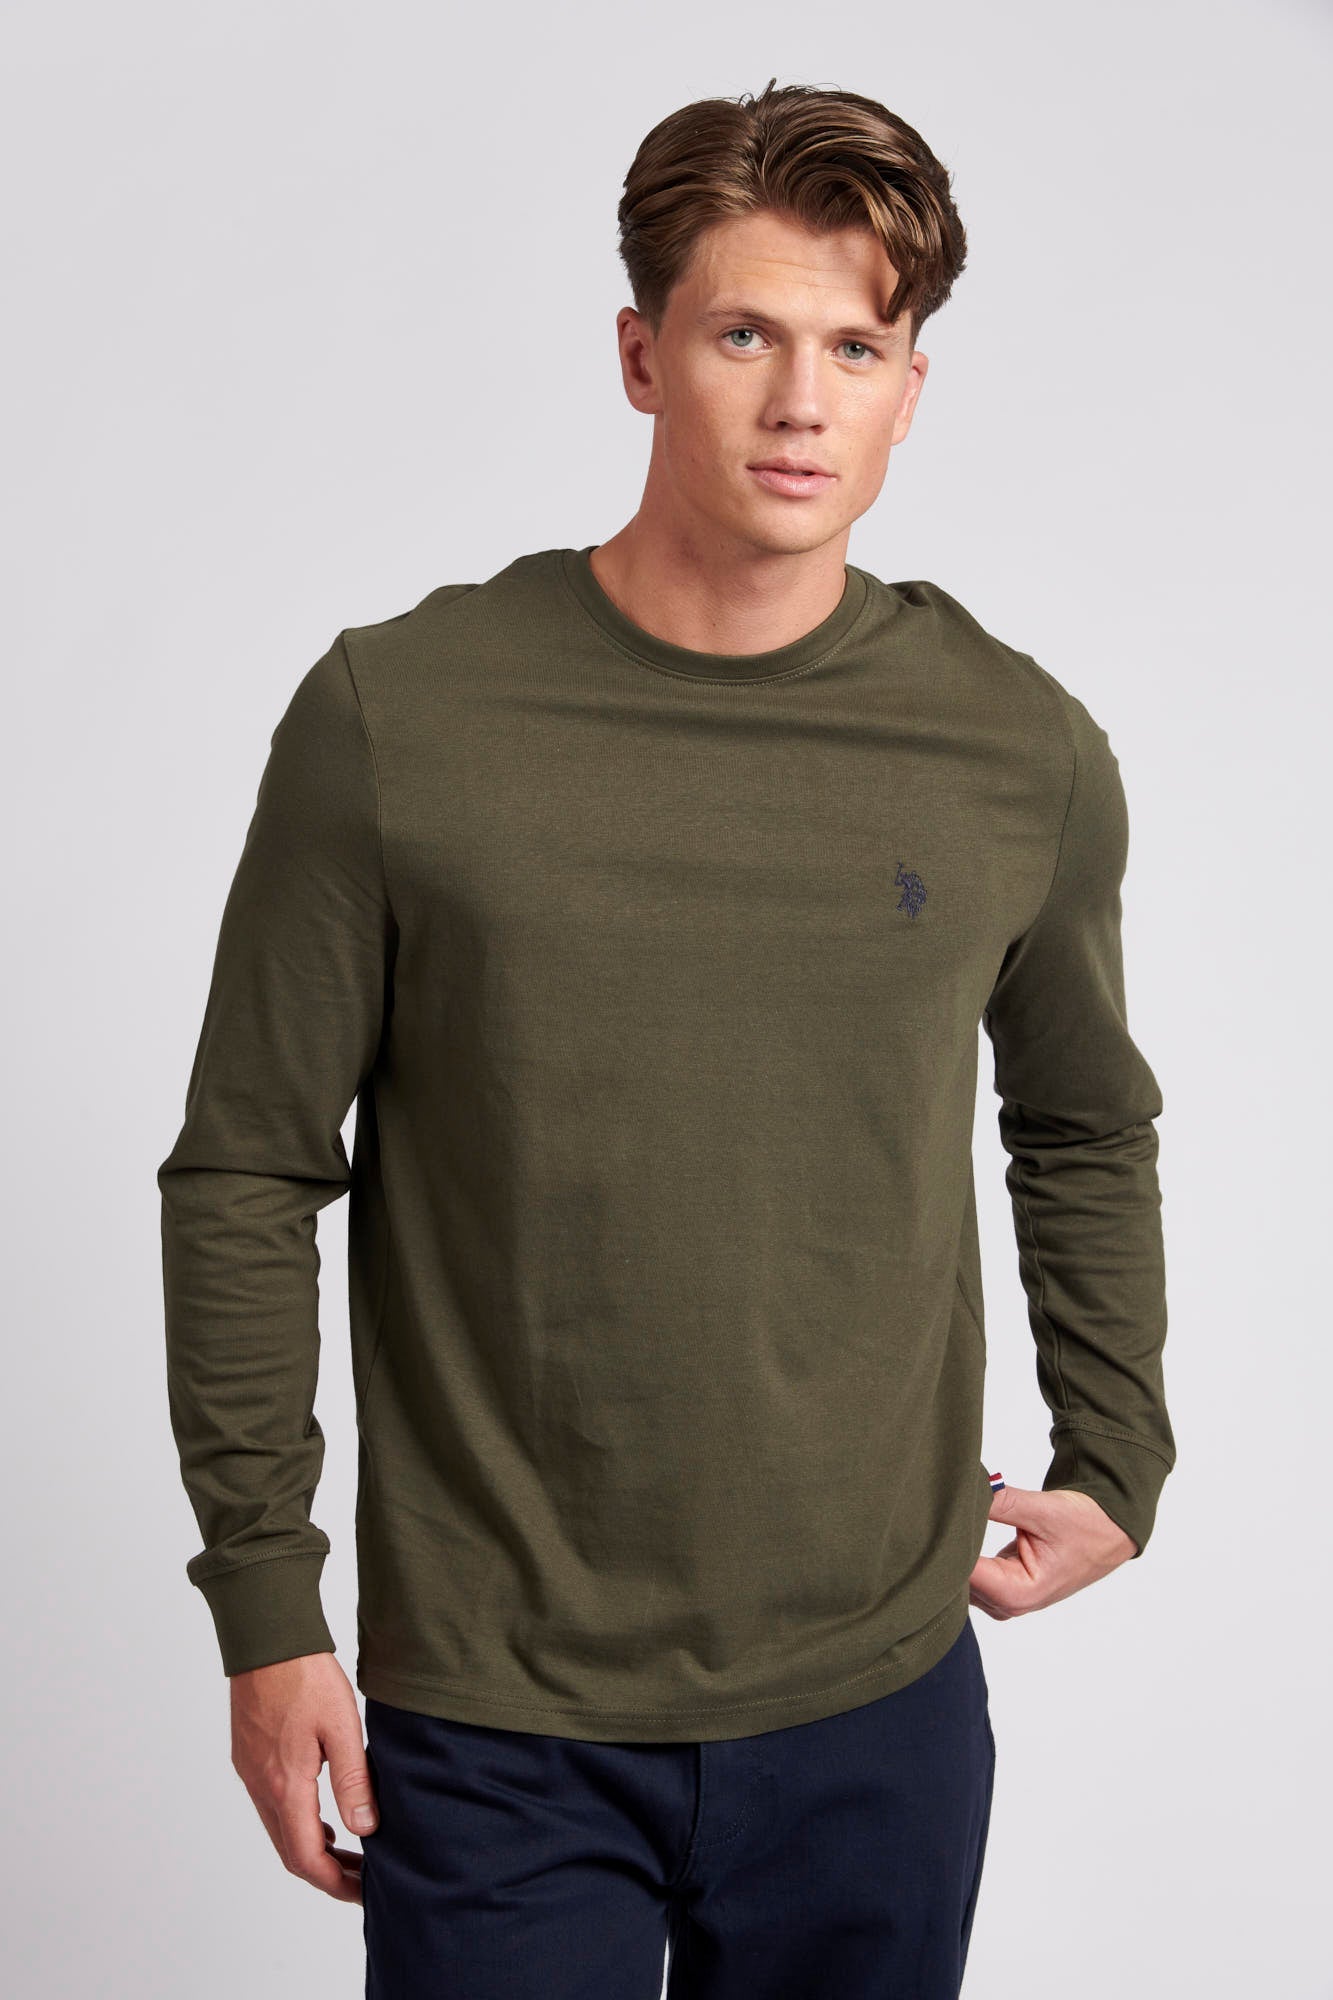 U.S. Polo Assn. Mens Long Sleeved T-Shirt in Forest Night